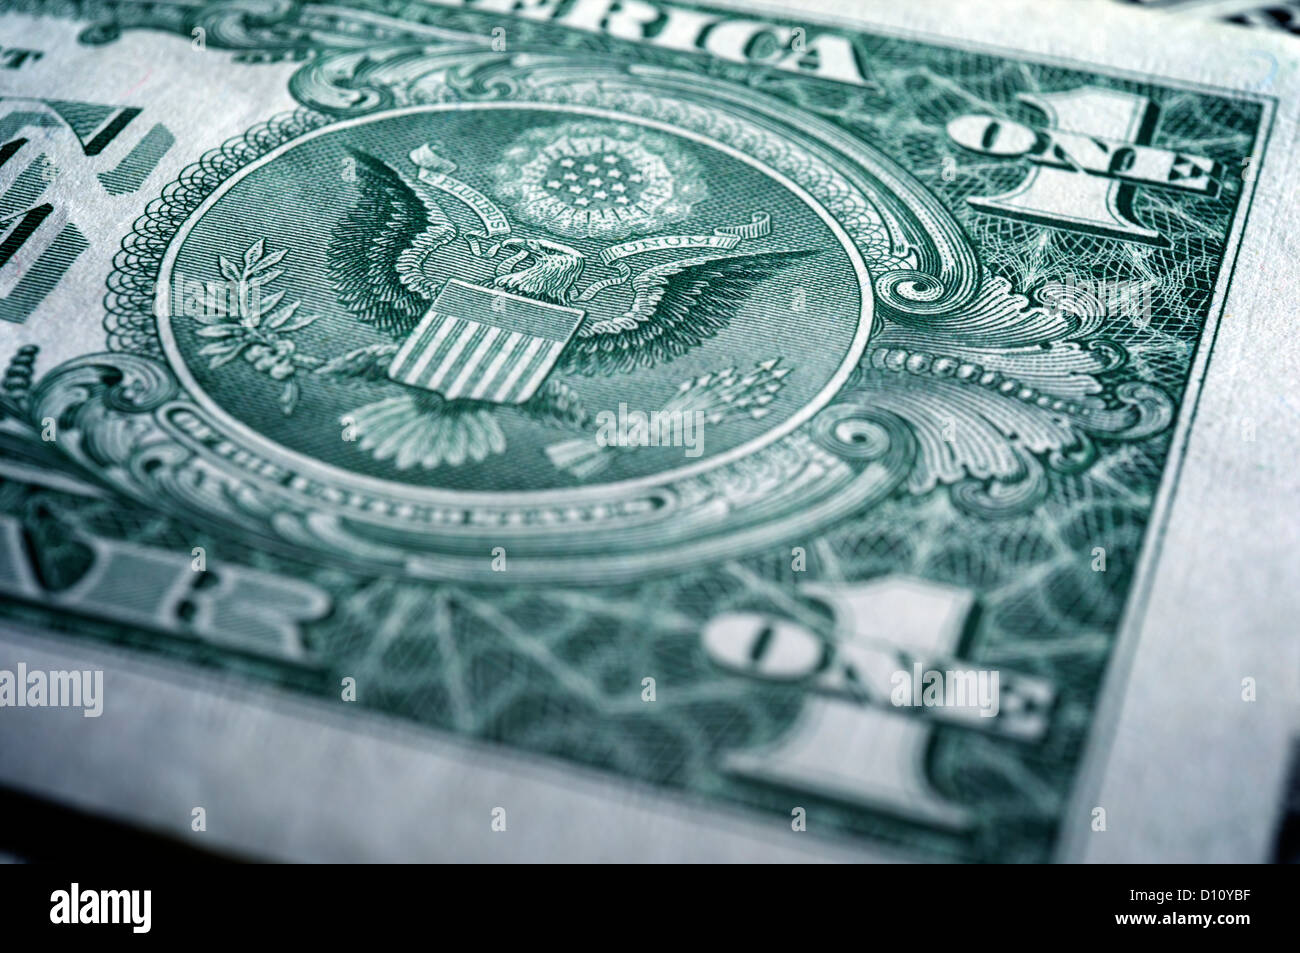 Detail of the official seal and coat of arms on a US dollar bill Stock Photo